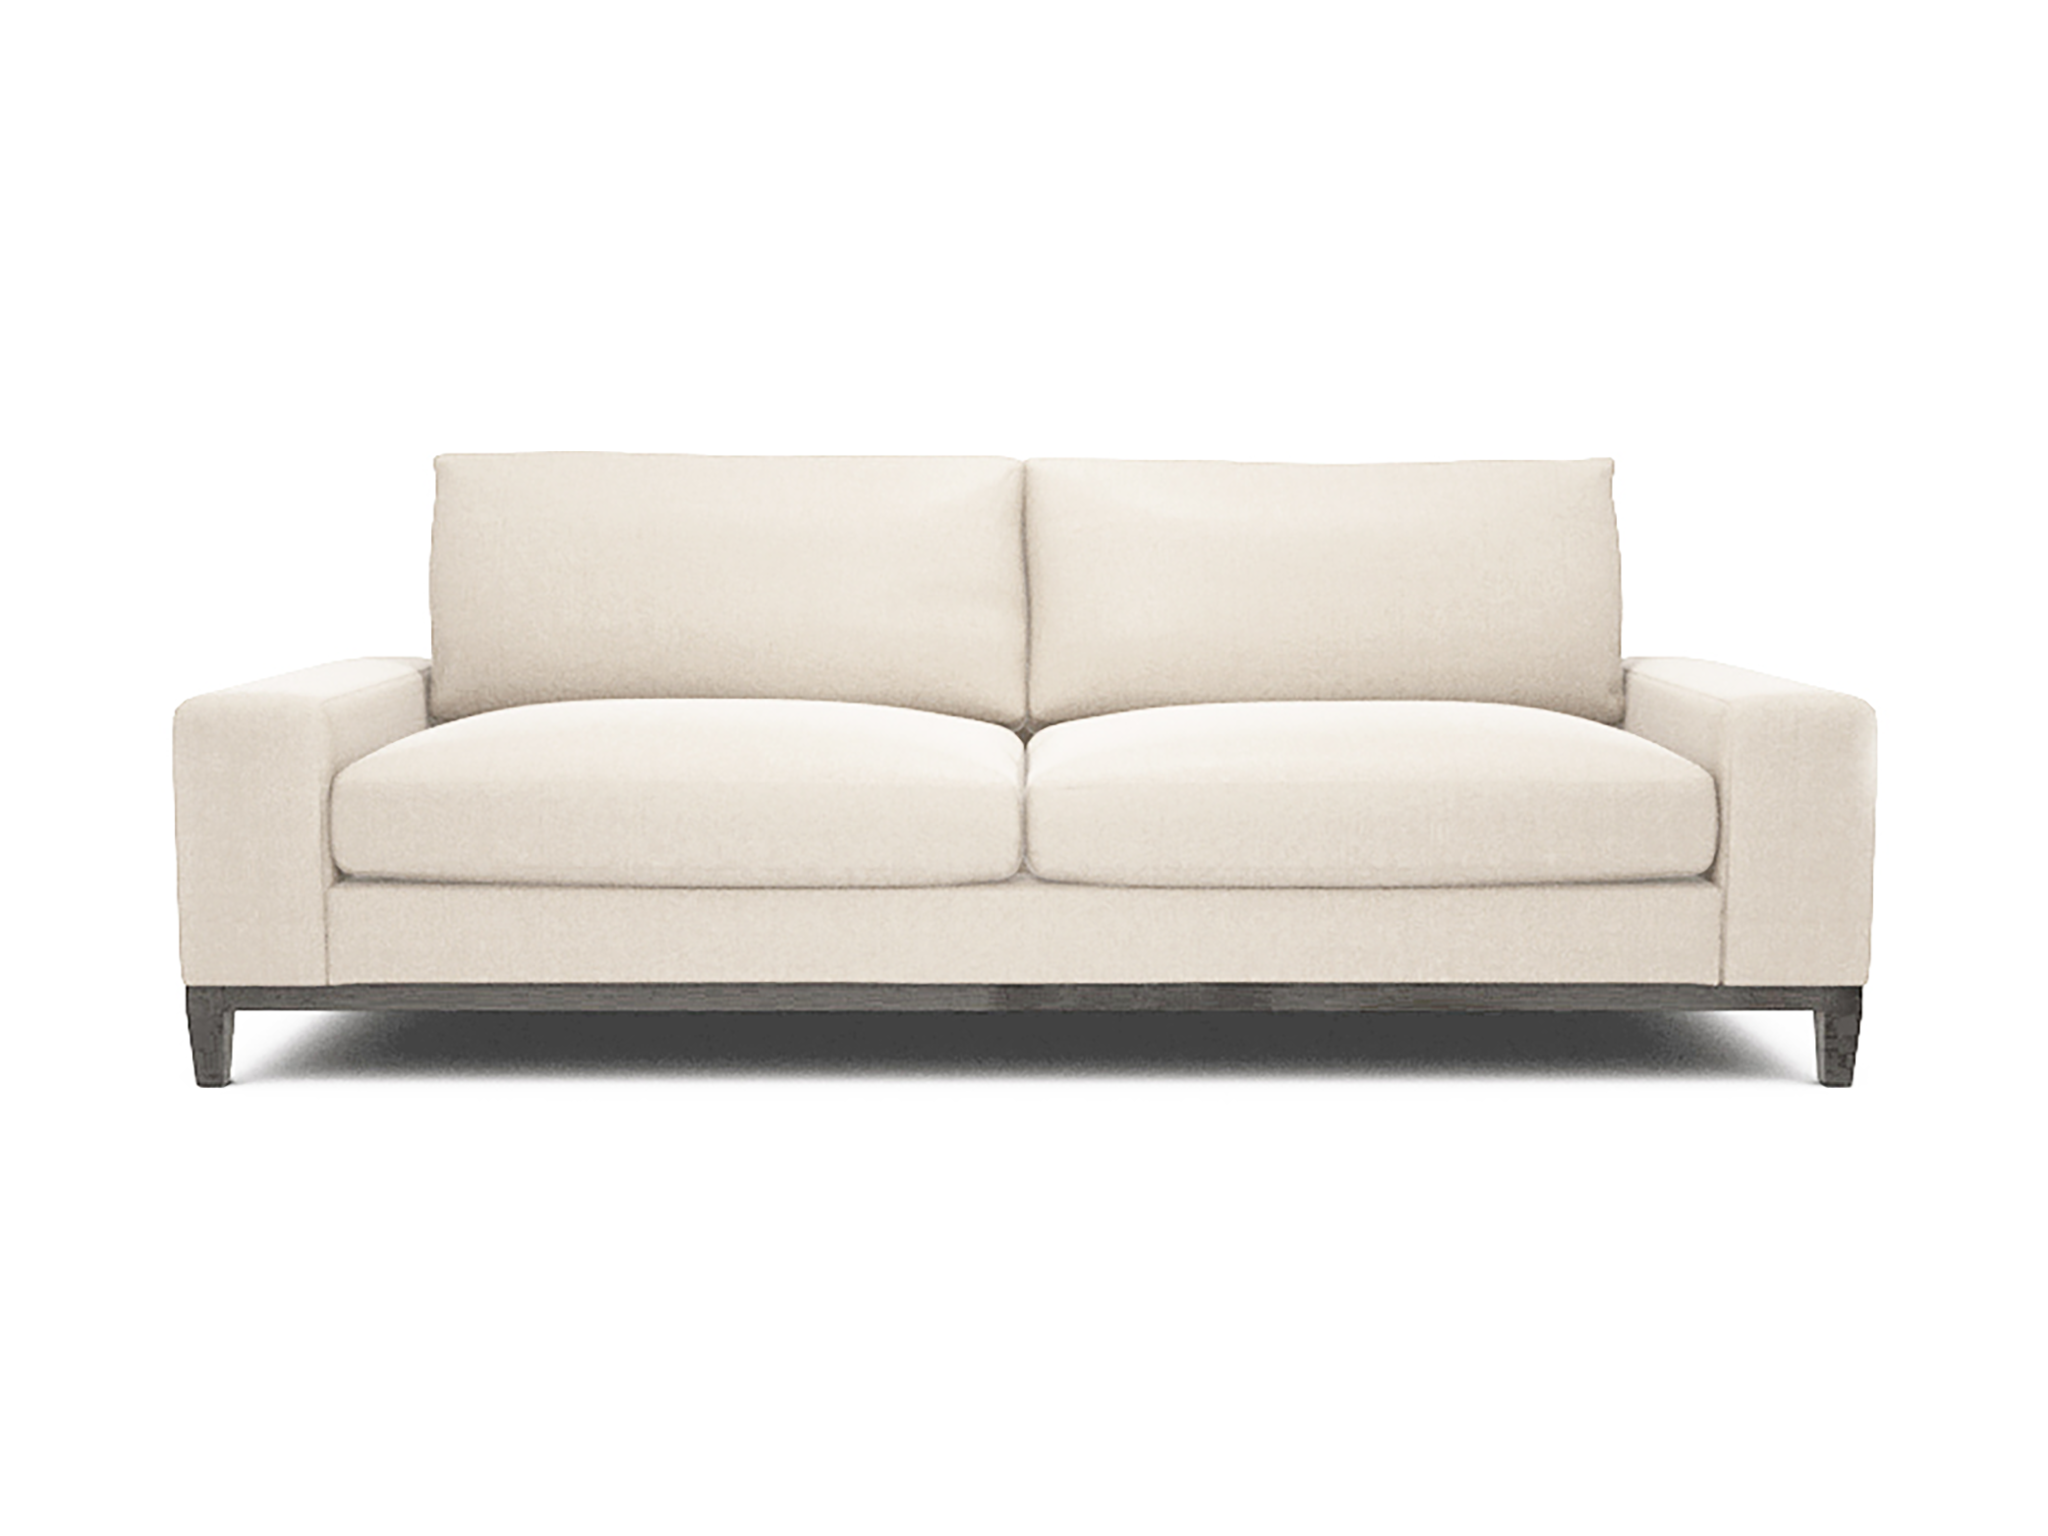 best sofas review Raft New York 4 seater sofa